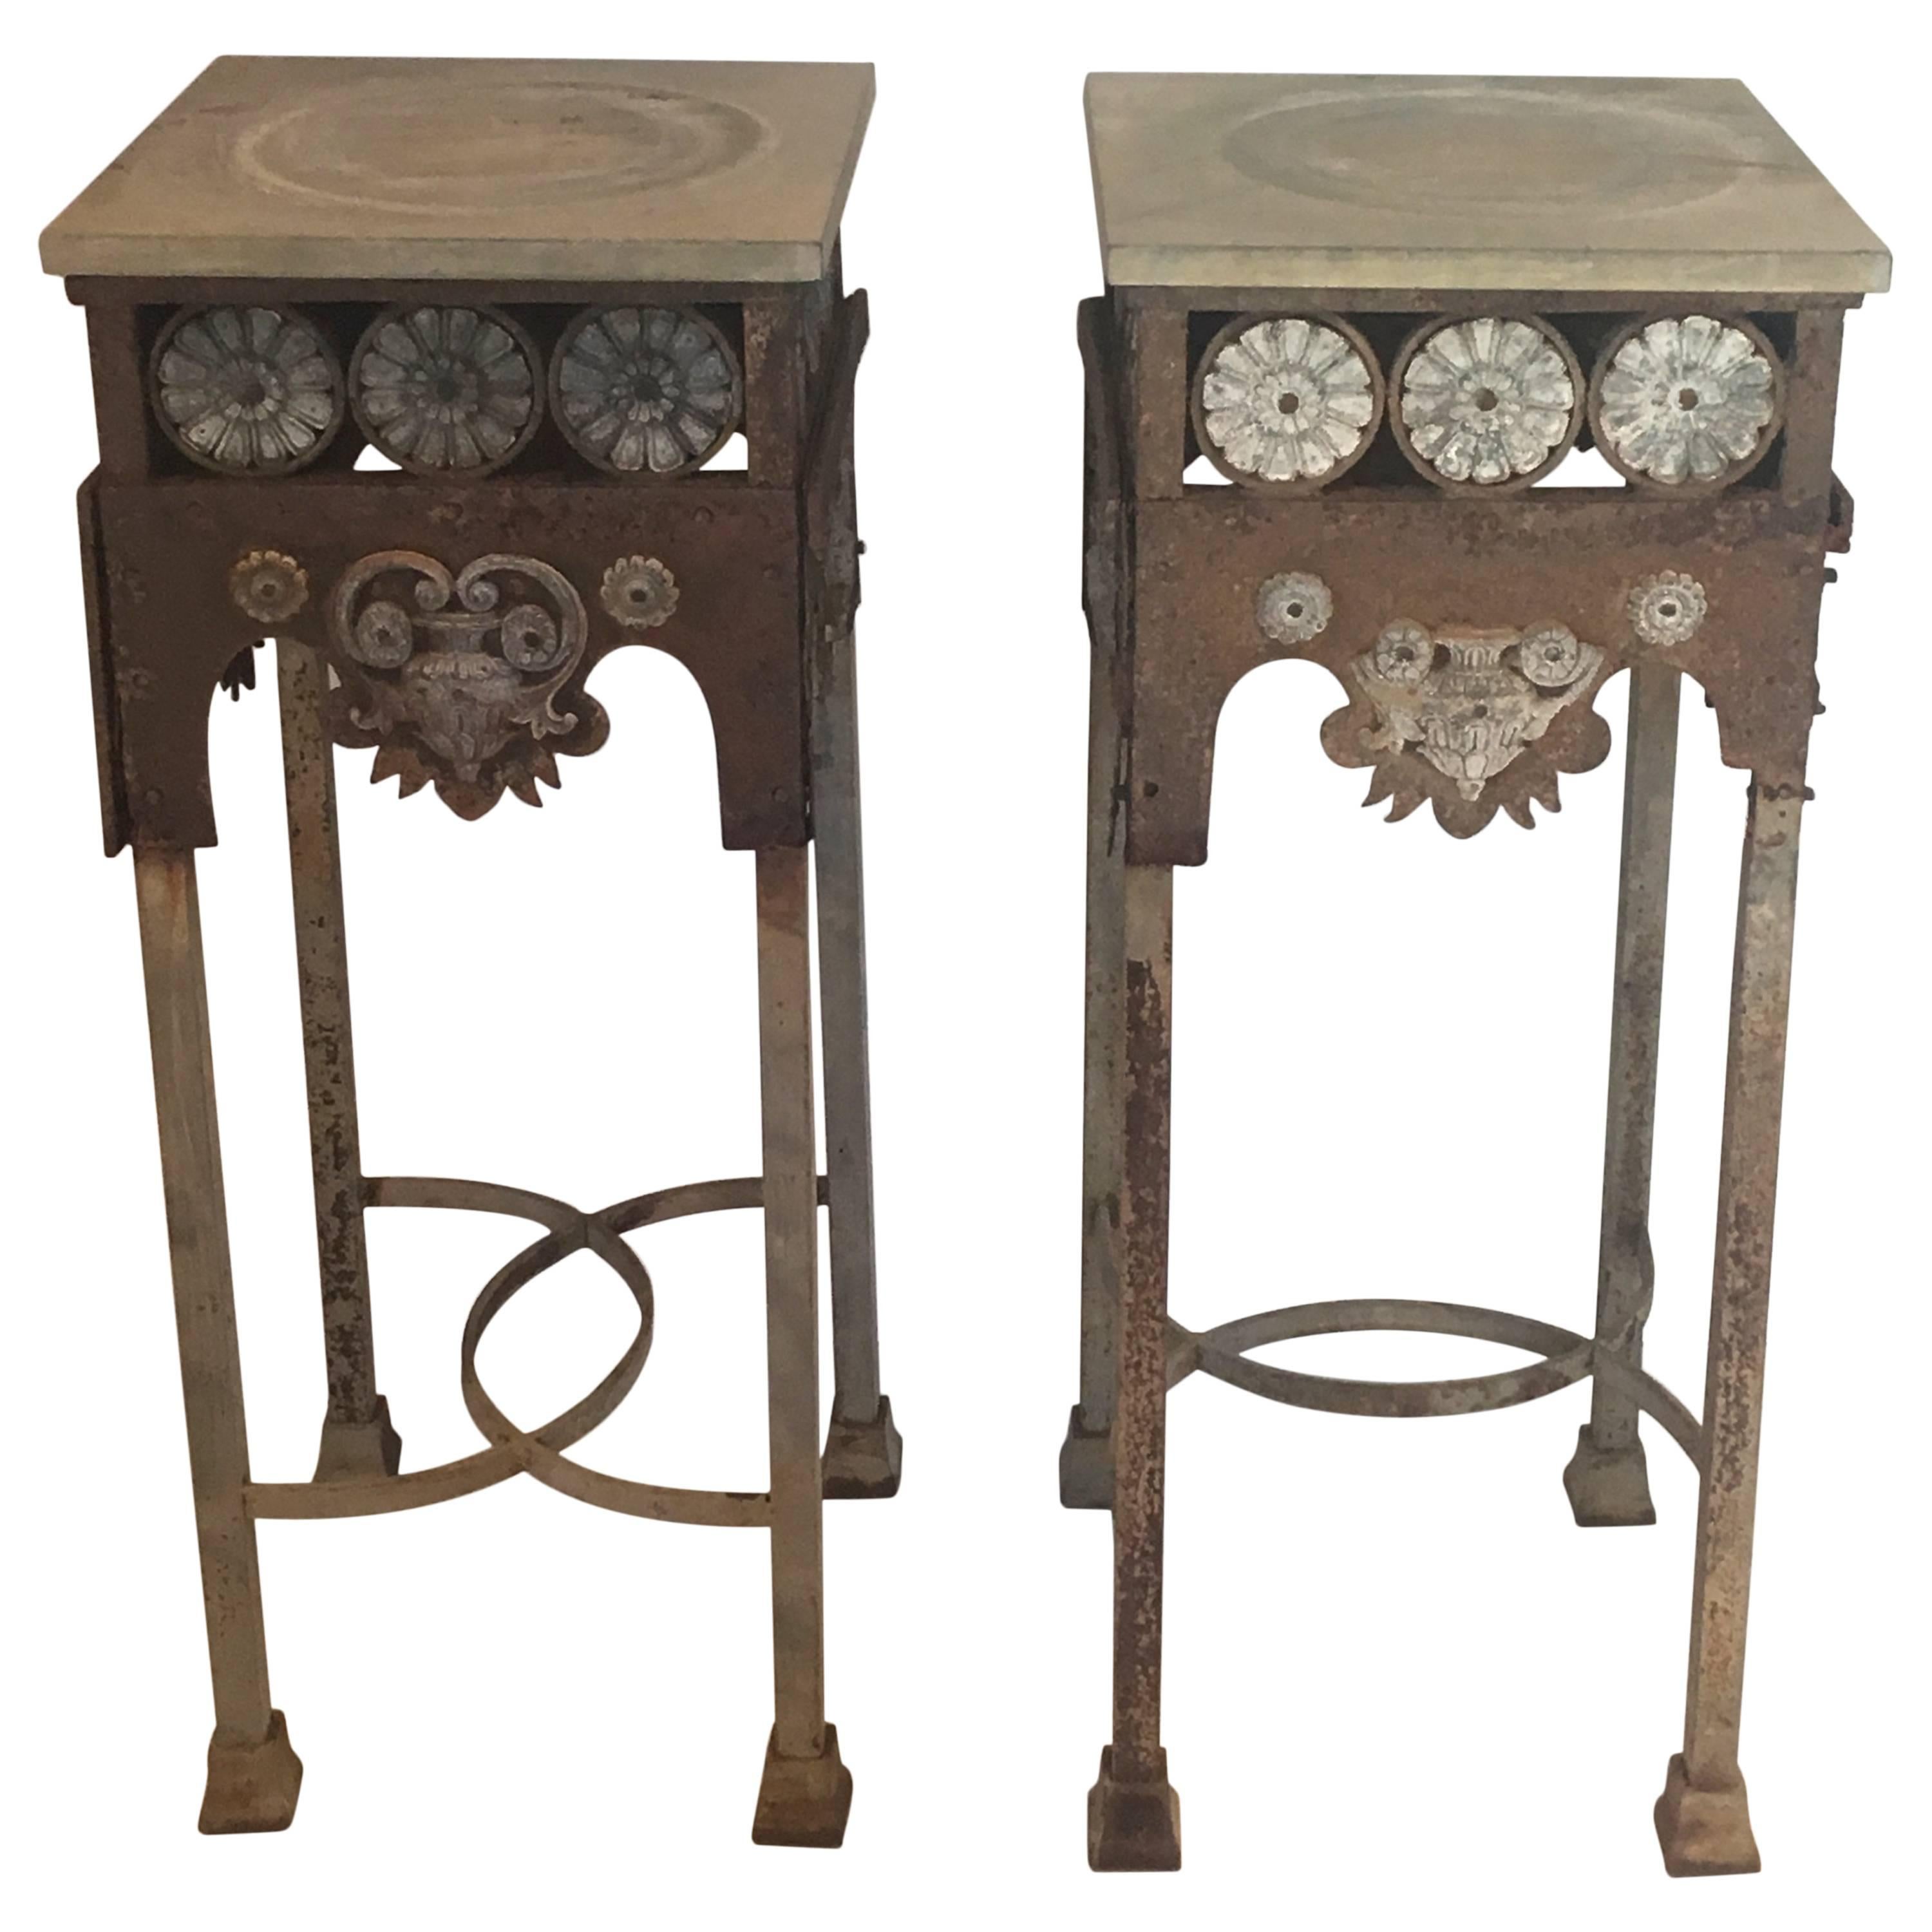 Pair of Tall Gothic Revival Stands in Iron and Zinc